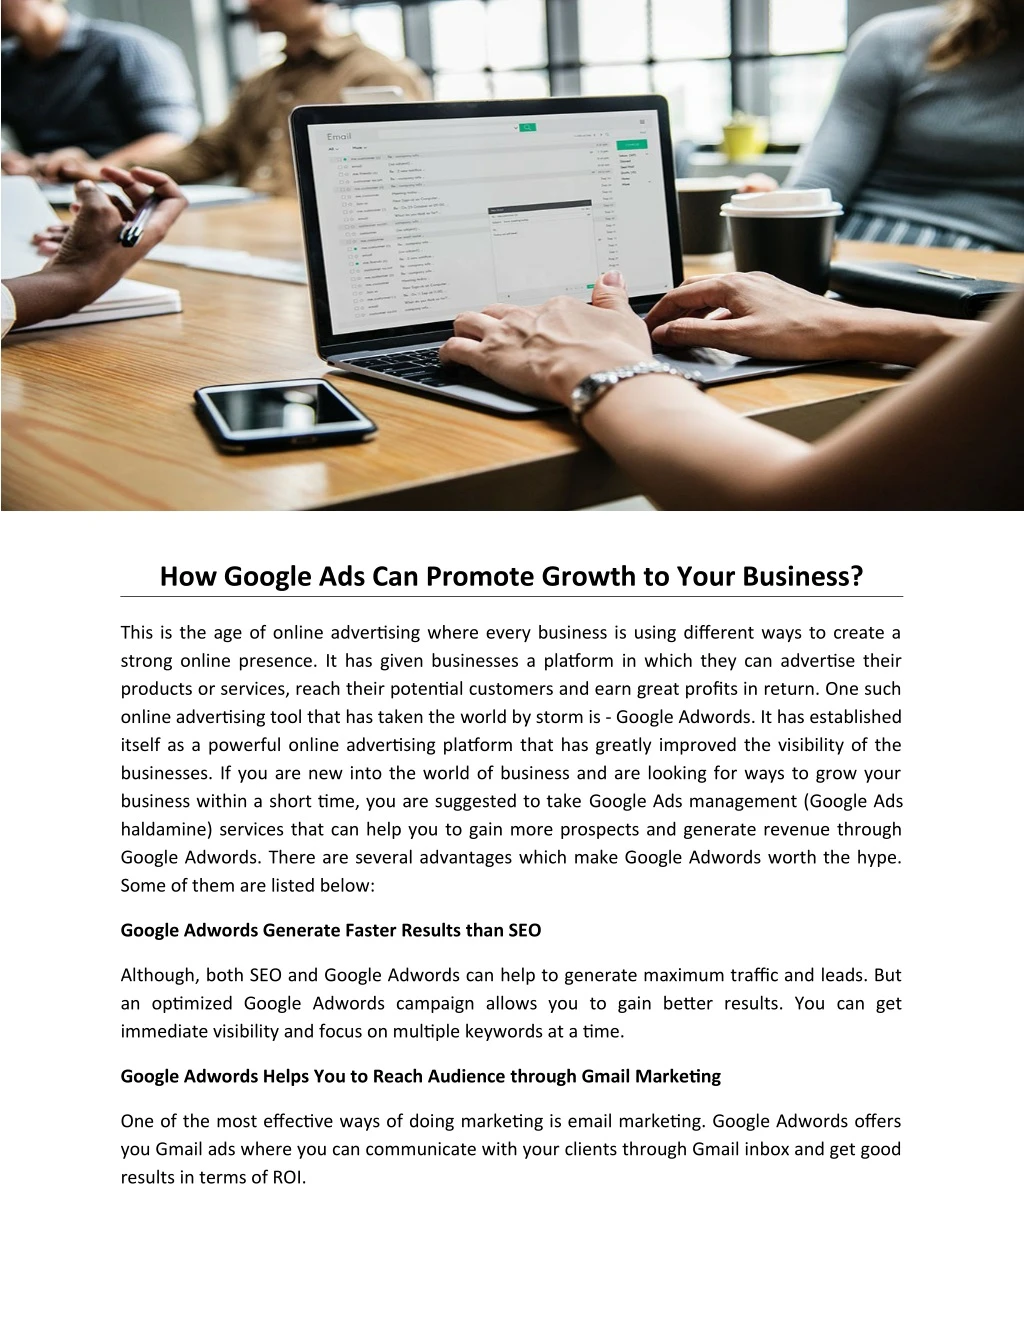 how google ads can promote growth to your business